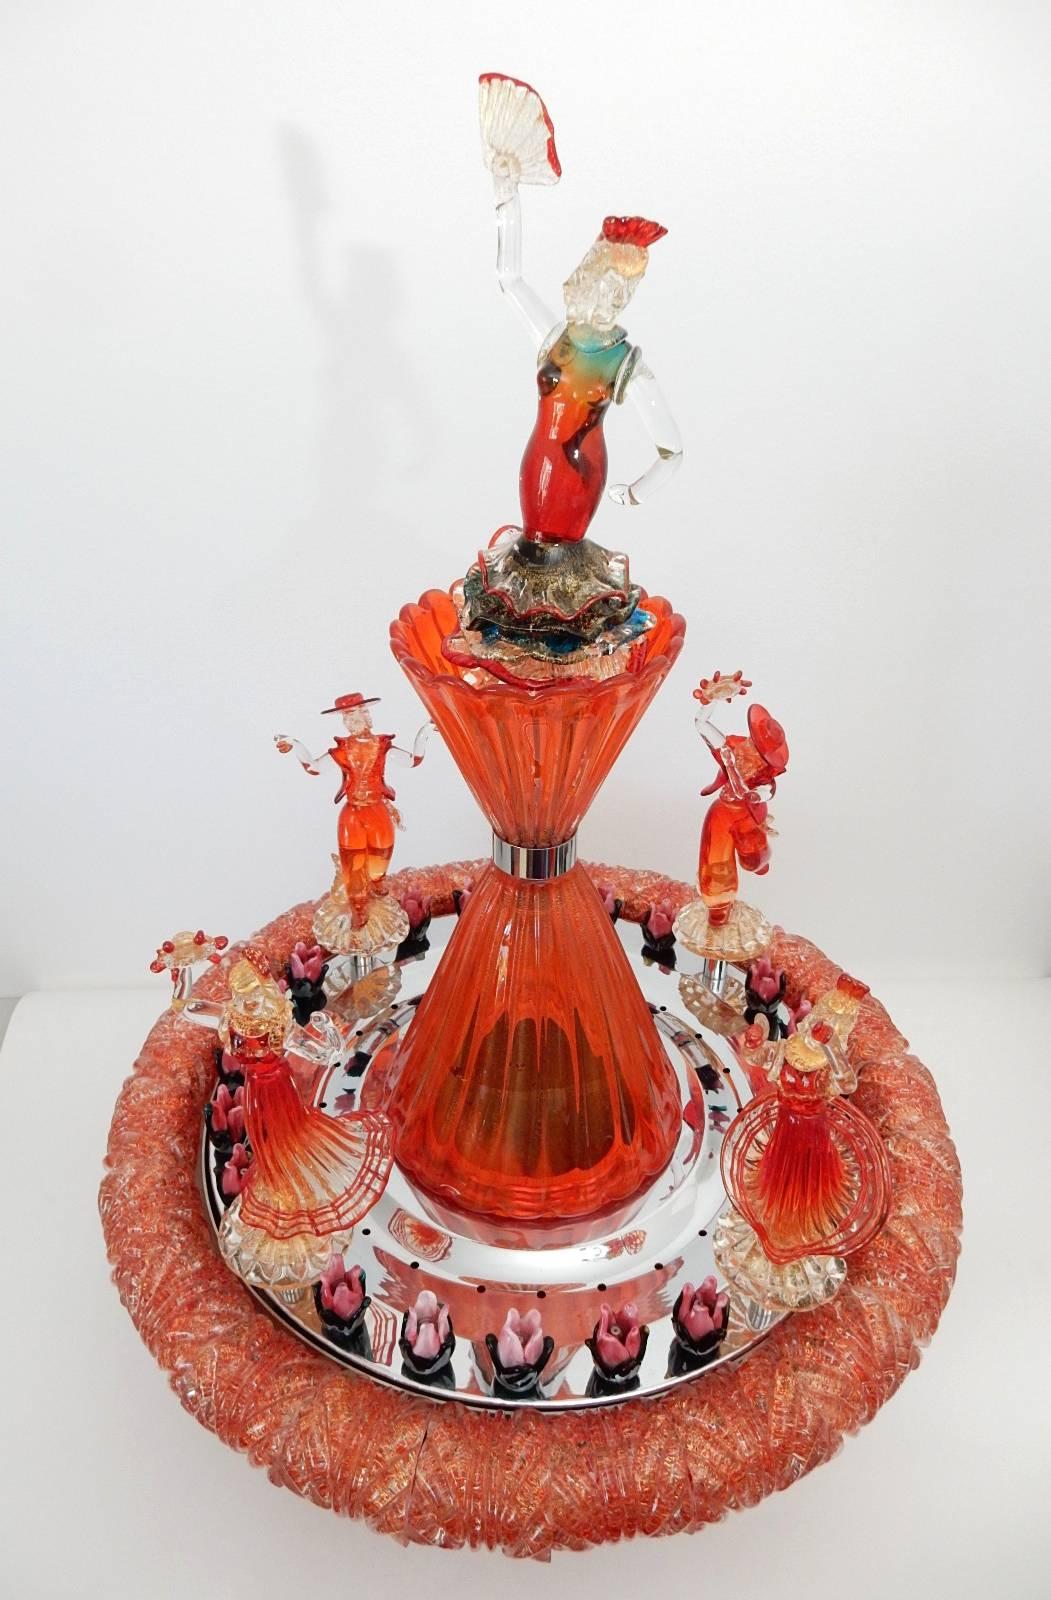 This fountain is a true masterpiece of Murano art glass craftsmanship.
One of a kind ~El baile Flamenco~ work of art done in a mesmerizing orange glass, circa 1960s.
Water spouts from center of each hand formed glass flower while pairs of baile